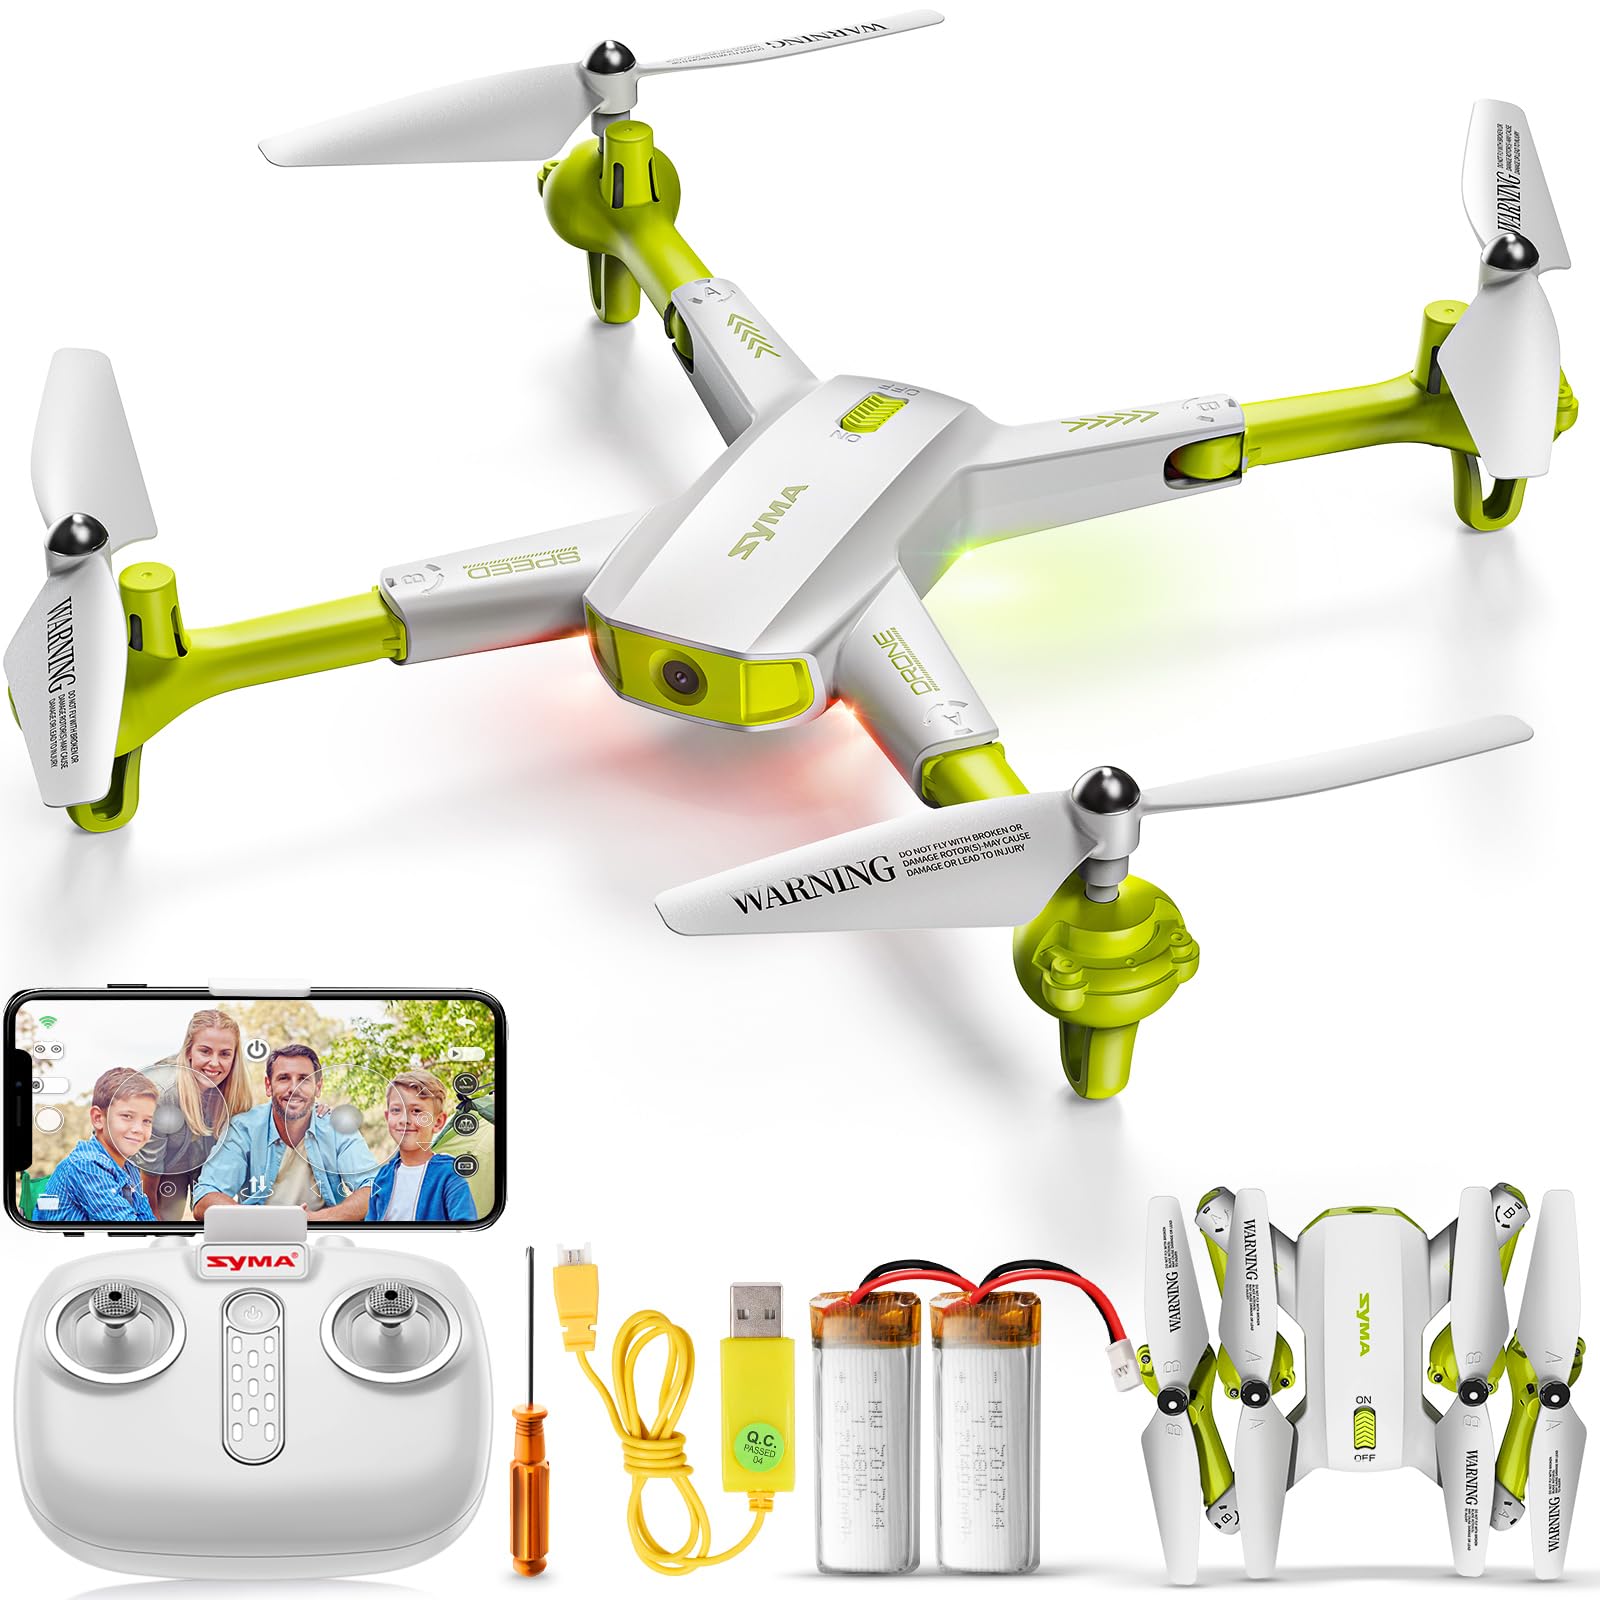 SYMA Drone with Camera 1080P HD FPV Cameras Remote Control Toys RC Quadcopter Helicopter Gifts for Boys Girls Adults Beginners with Altitude Hold, Headless Mode, One Key Start, 3D Flips 2 Batteries